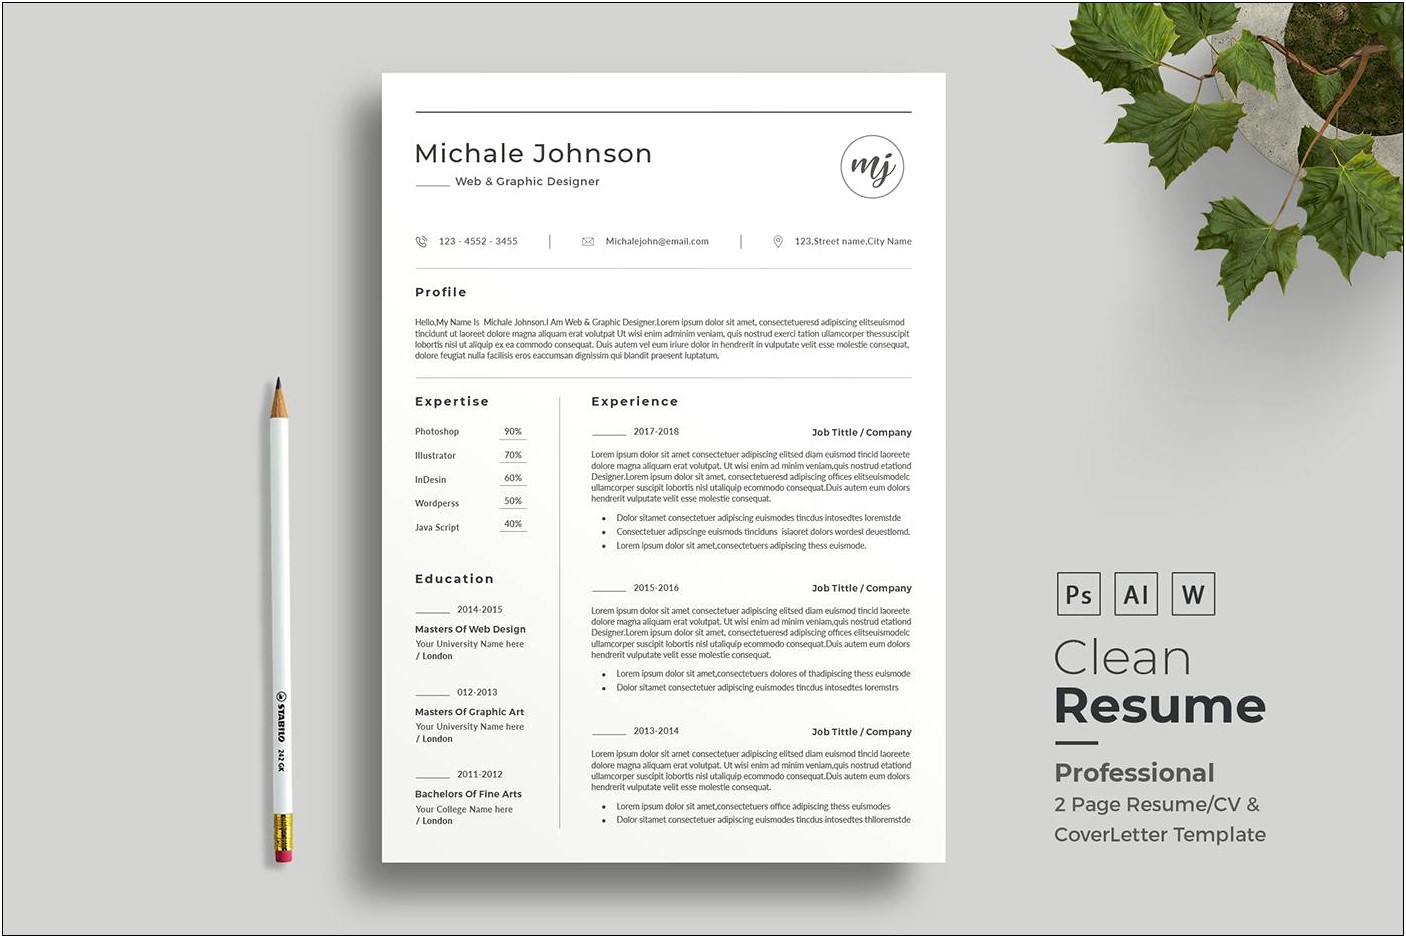 Download Resume Templates For Microsoft Word 2013